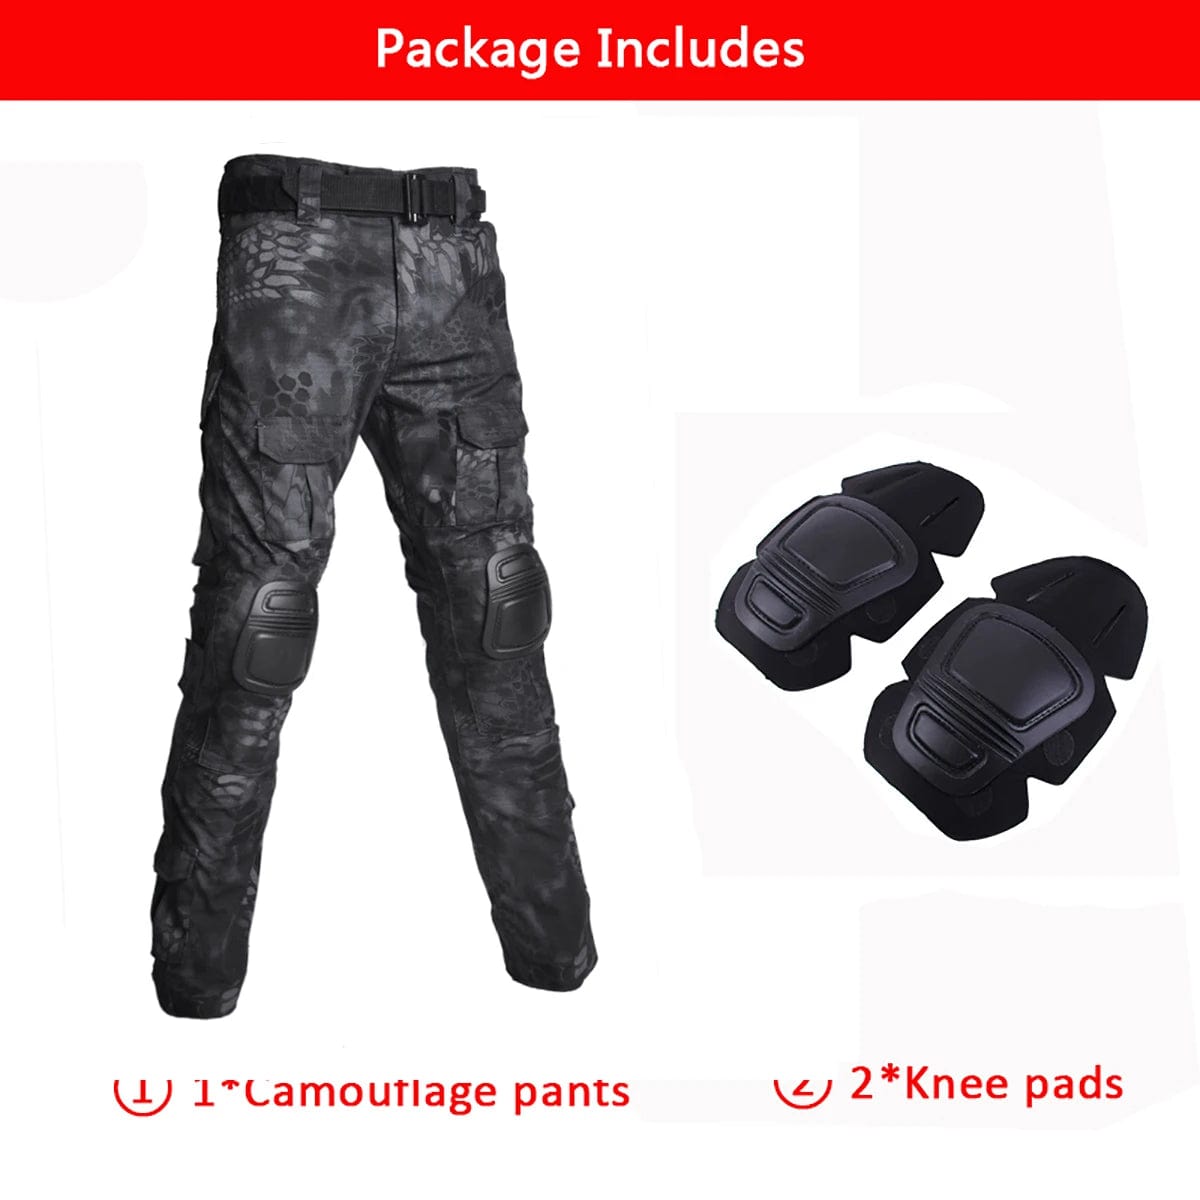 ACTION AIRSOFT black python / S(50-60kg) Airsoft Uniform Tactical Suits Army Camouflage Pants Military Clothing Hunting Clothes Paintball Suits Combat Shirt Pants +Pads